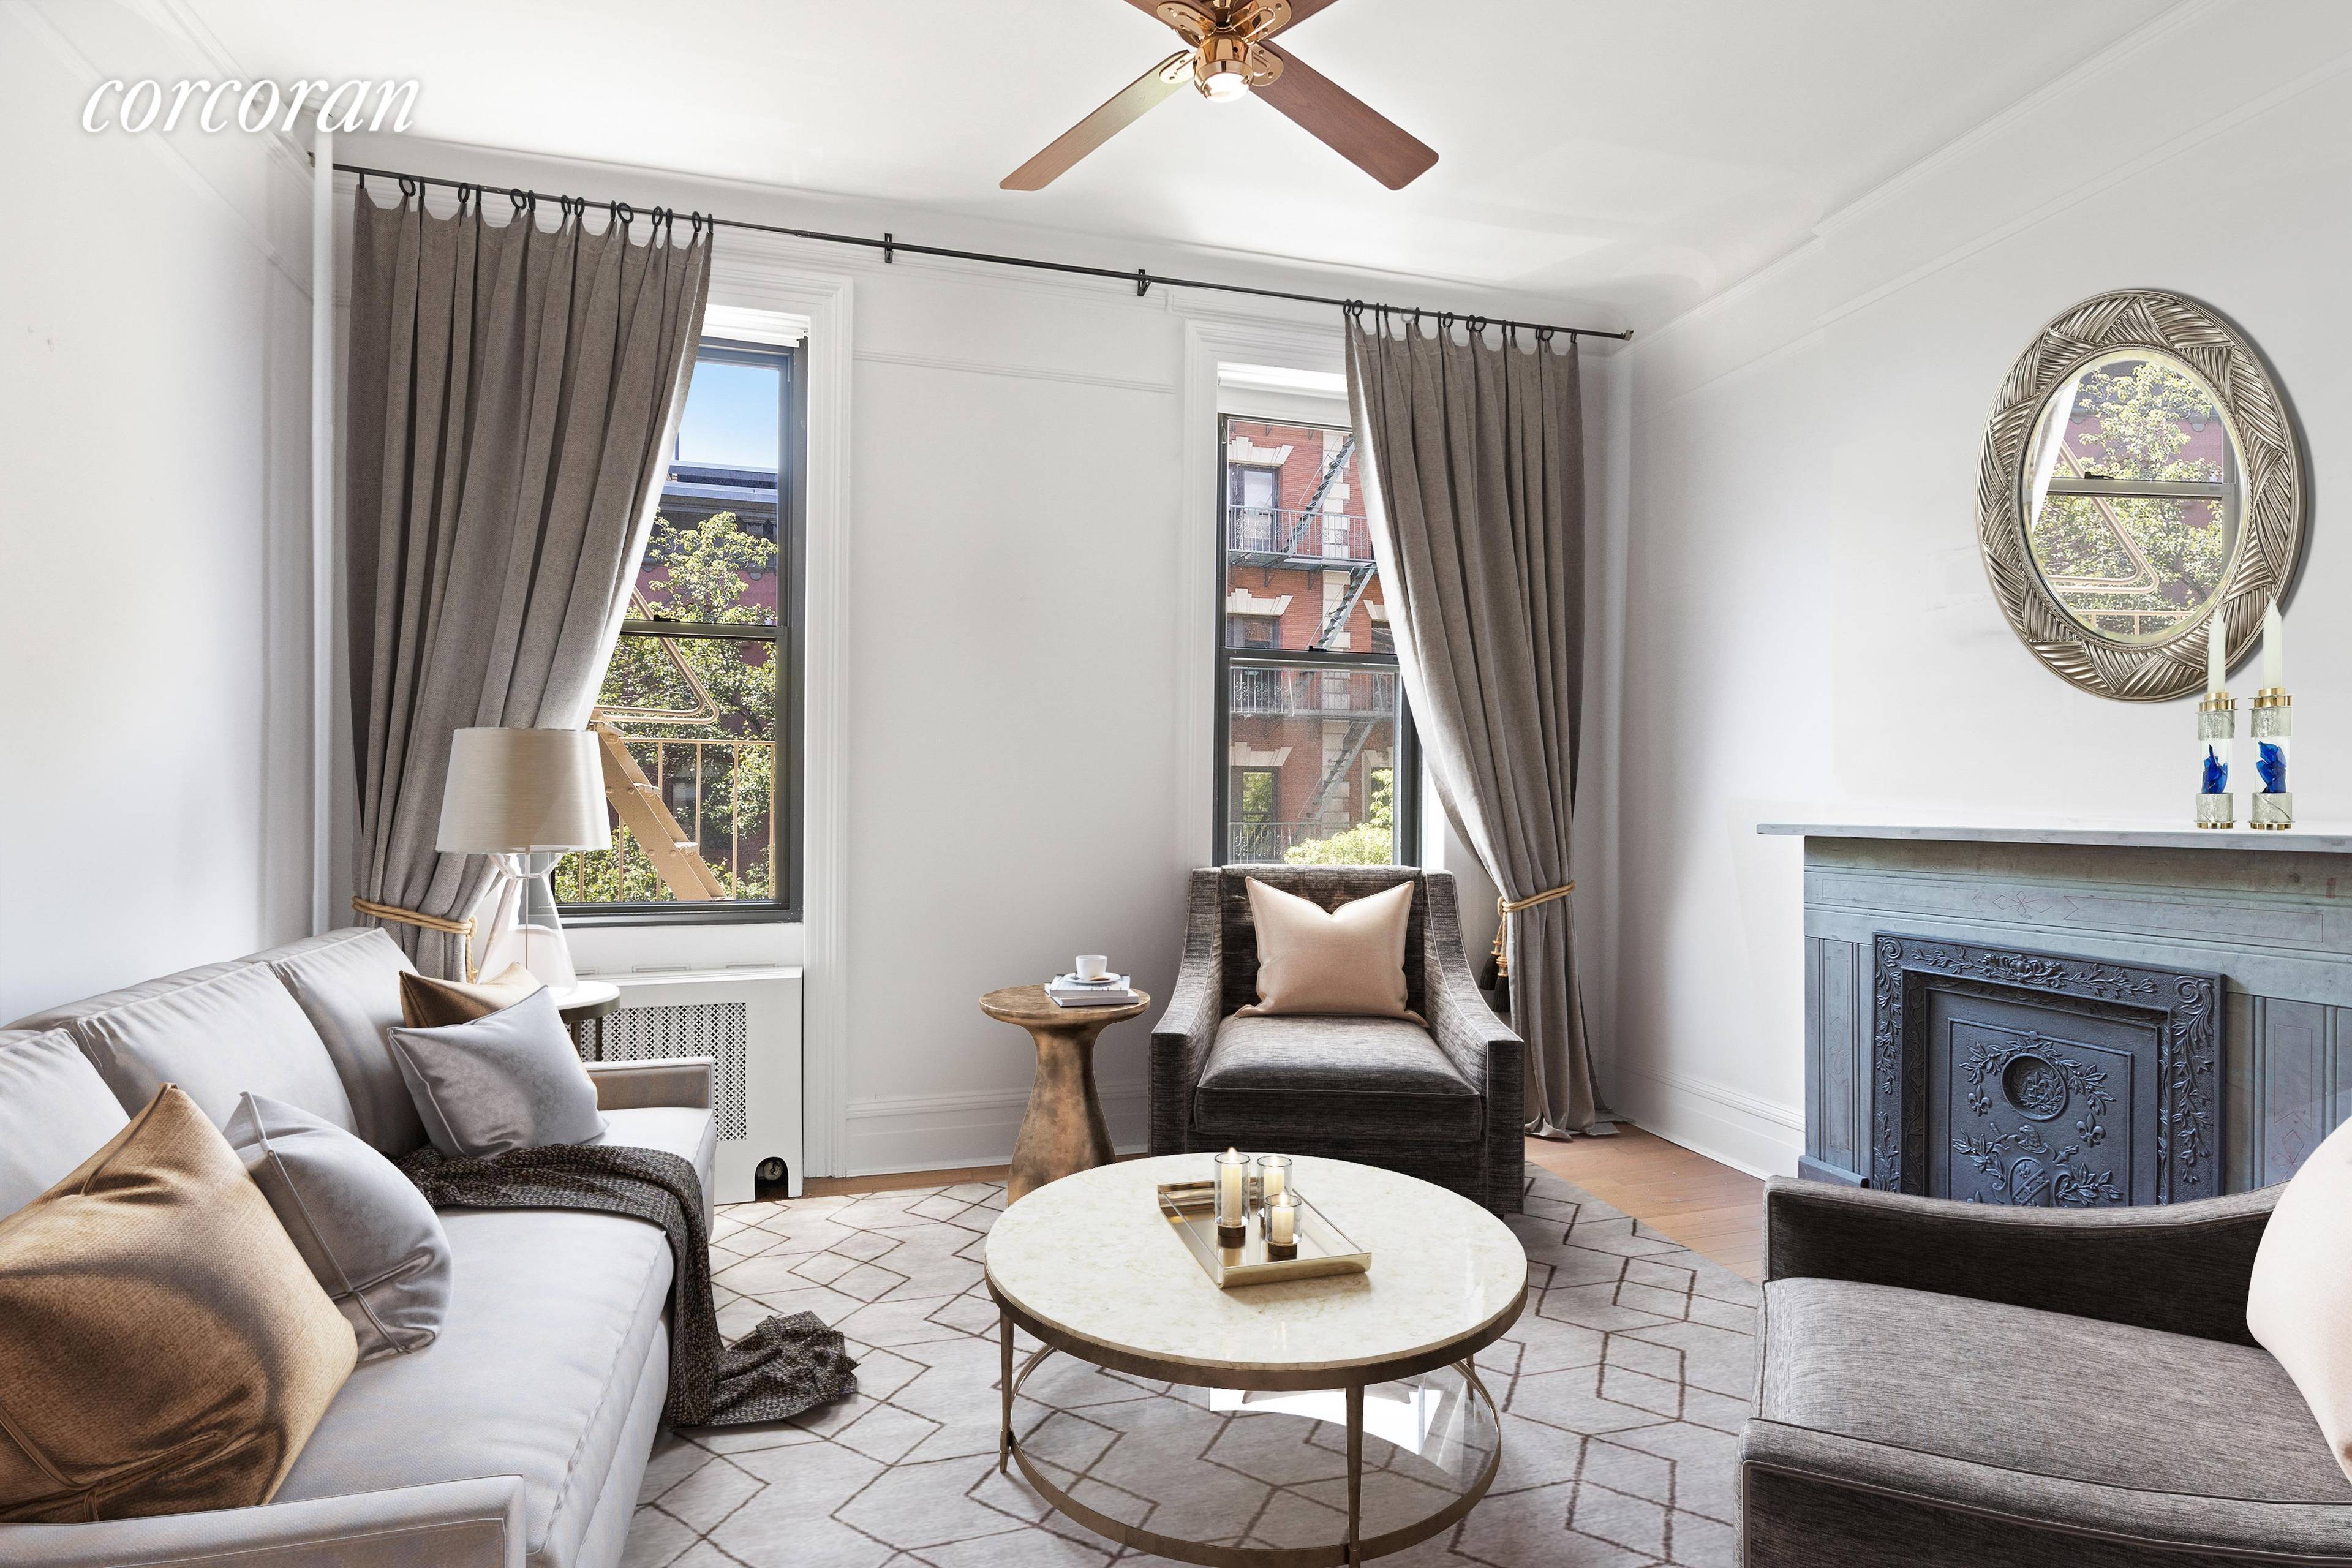 This 2 bedroom apartment in the heart of Chelsea features many charming details and original old world touches.